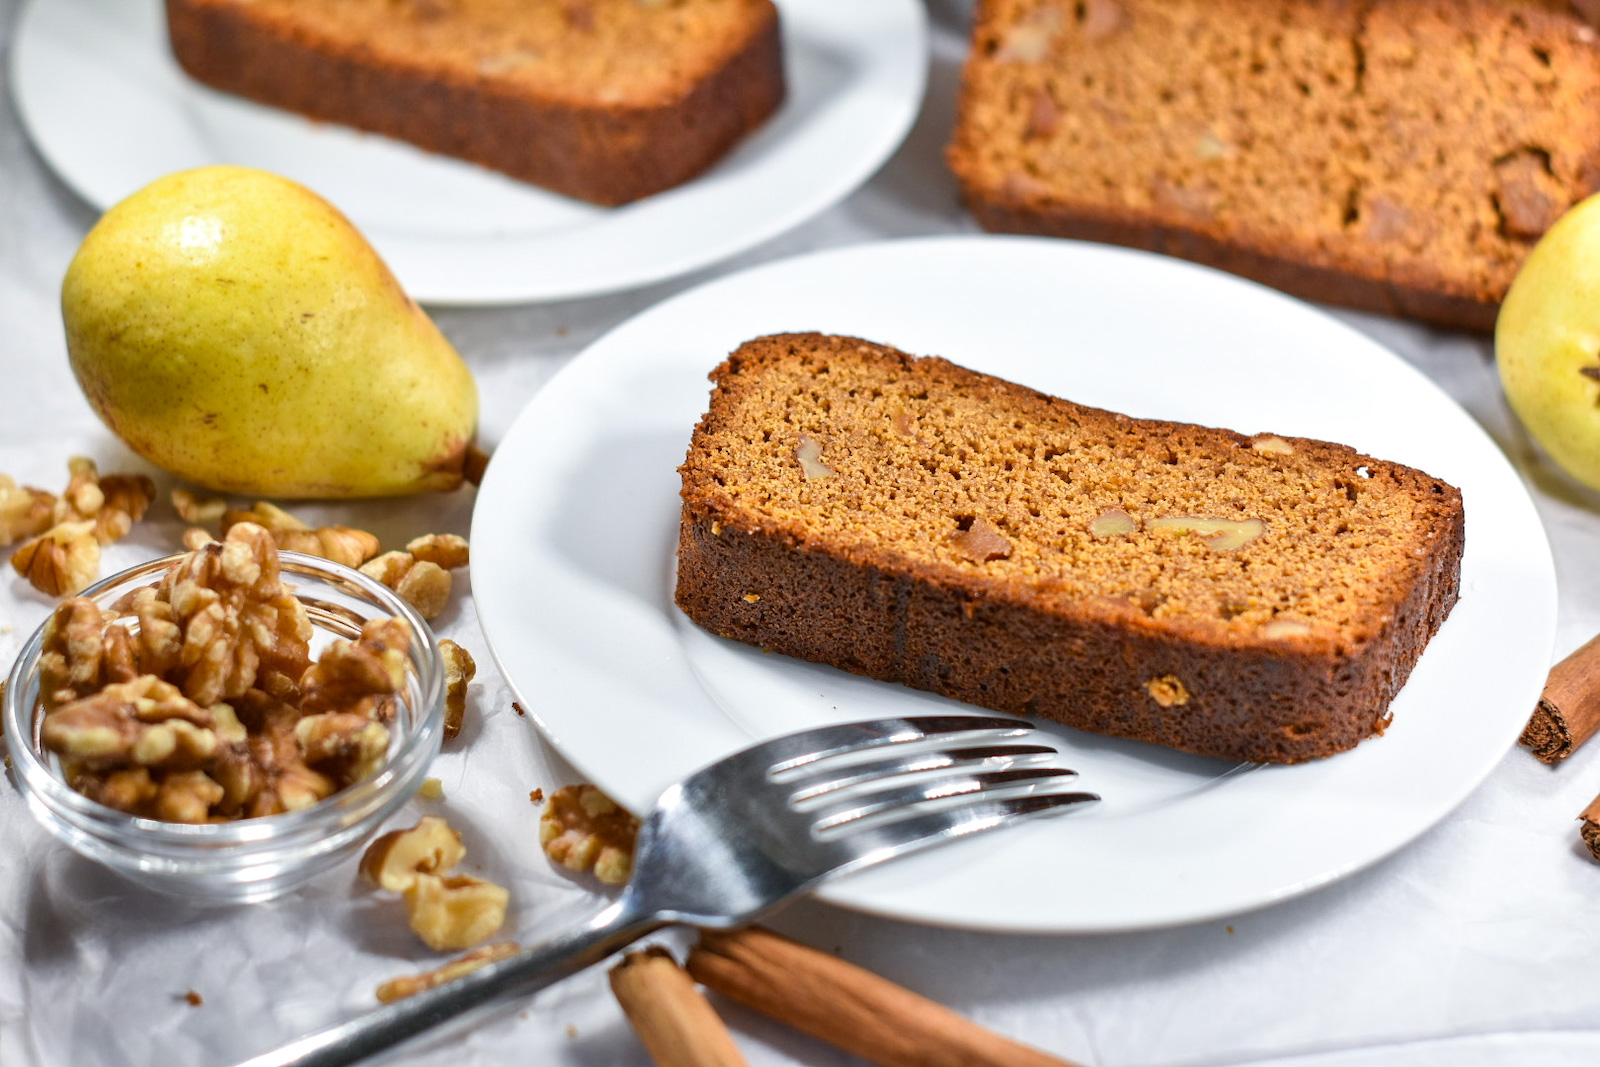 Gingerbread loaf slice on a plate, on a white background with whole pears and a bowl of walnuts